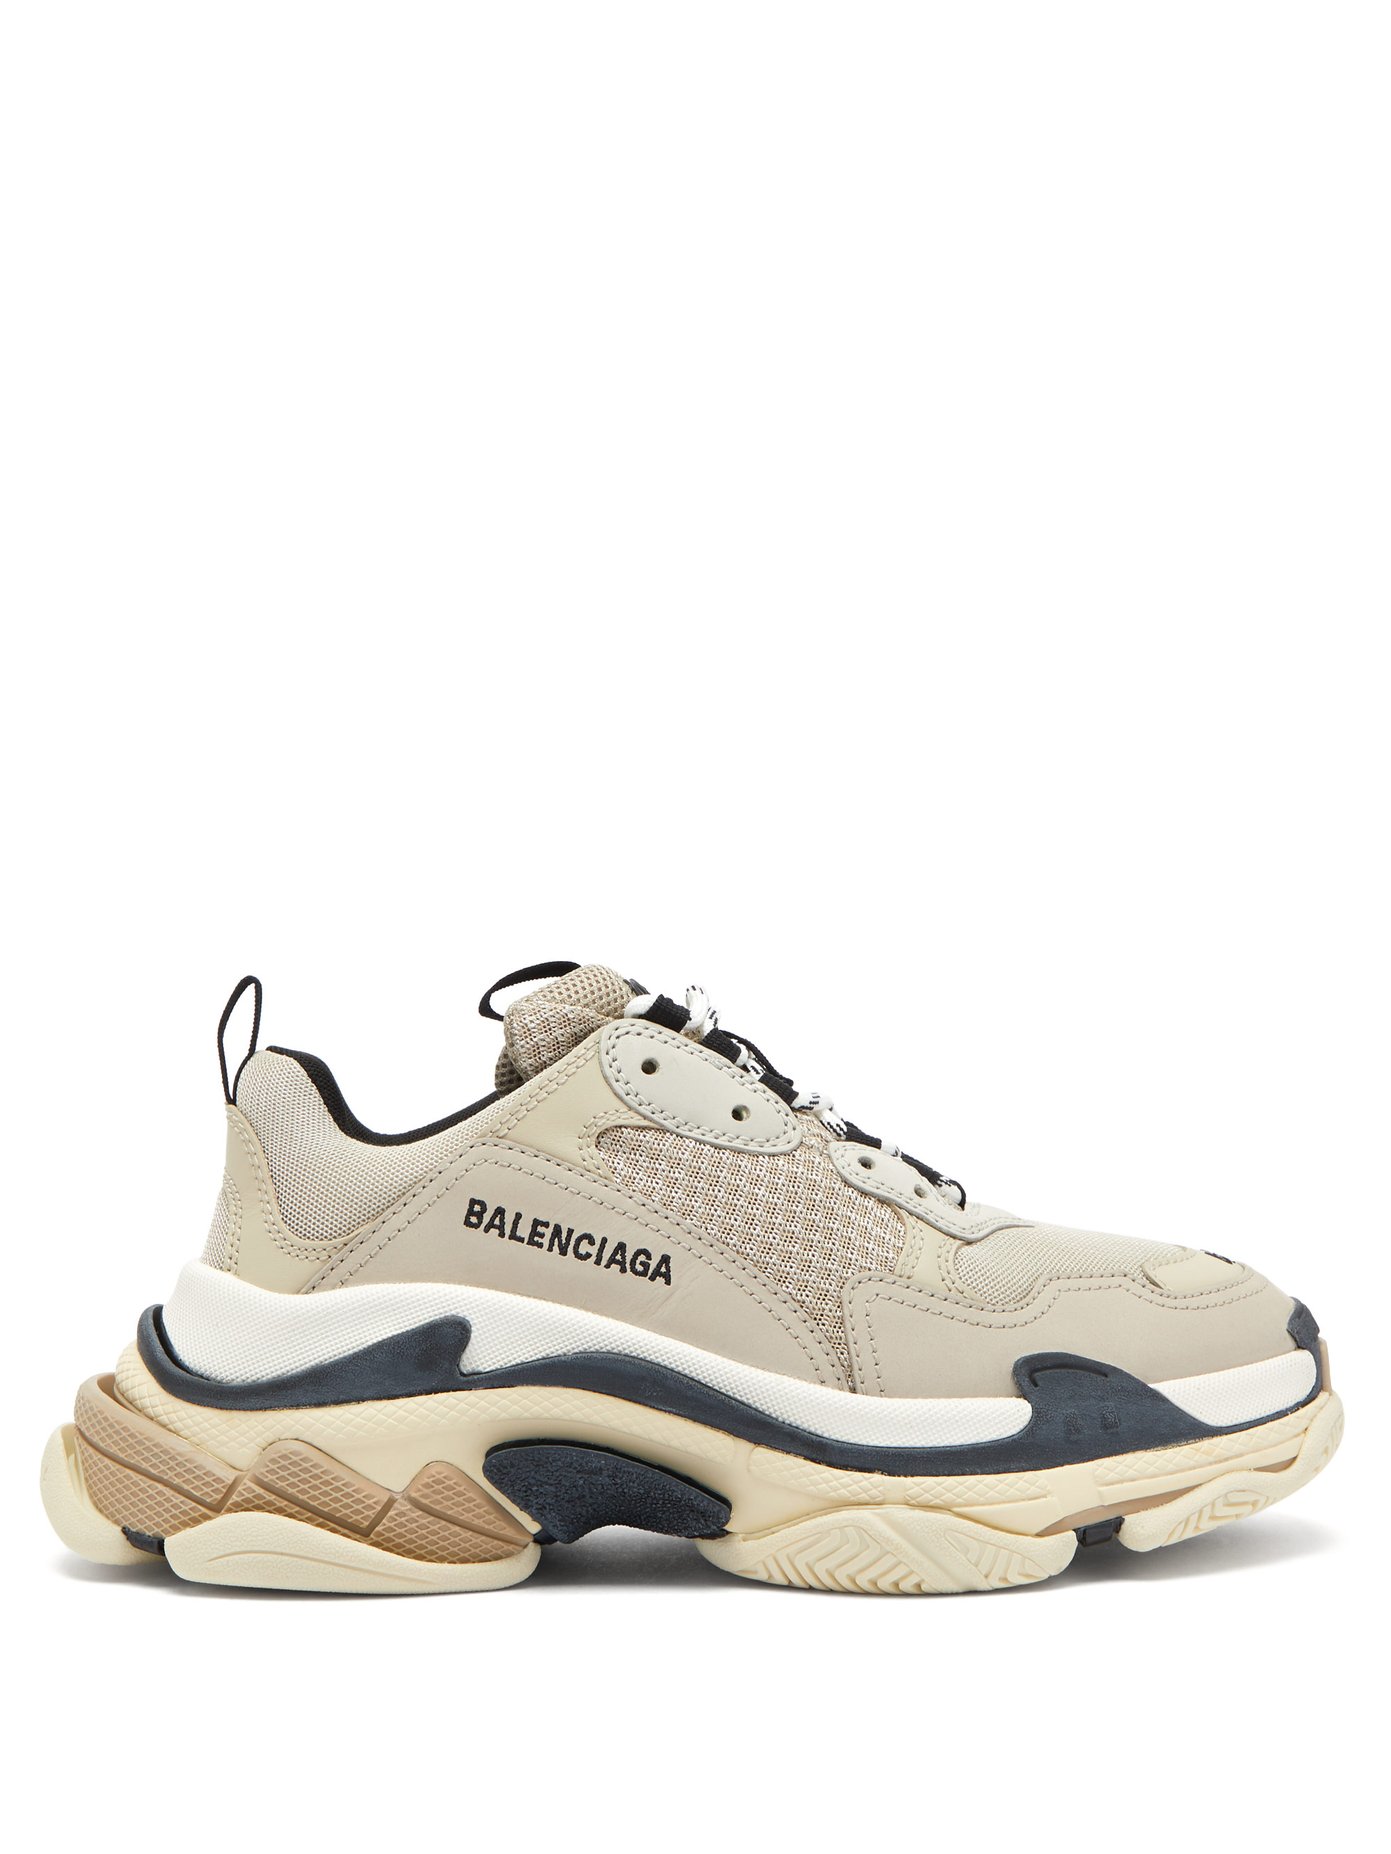 Balenciaga Triple S Clear Sole Trainer Available in Depop